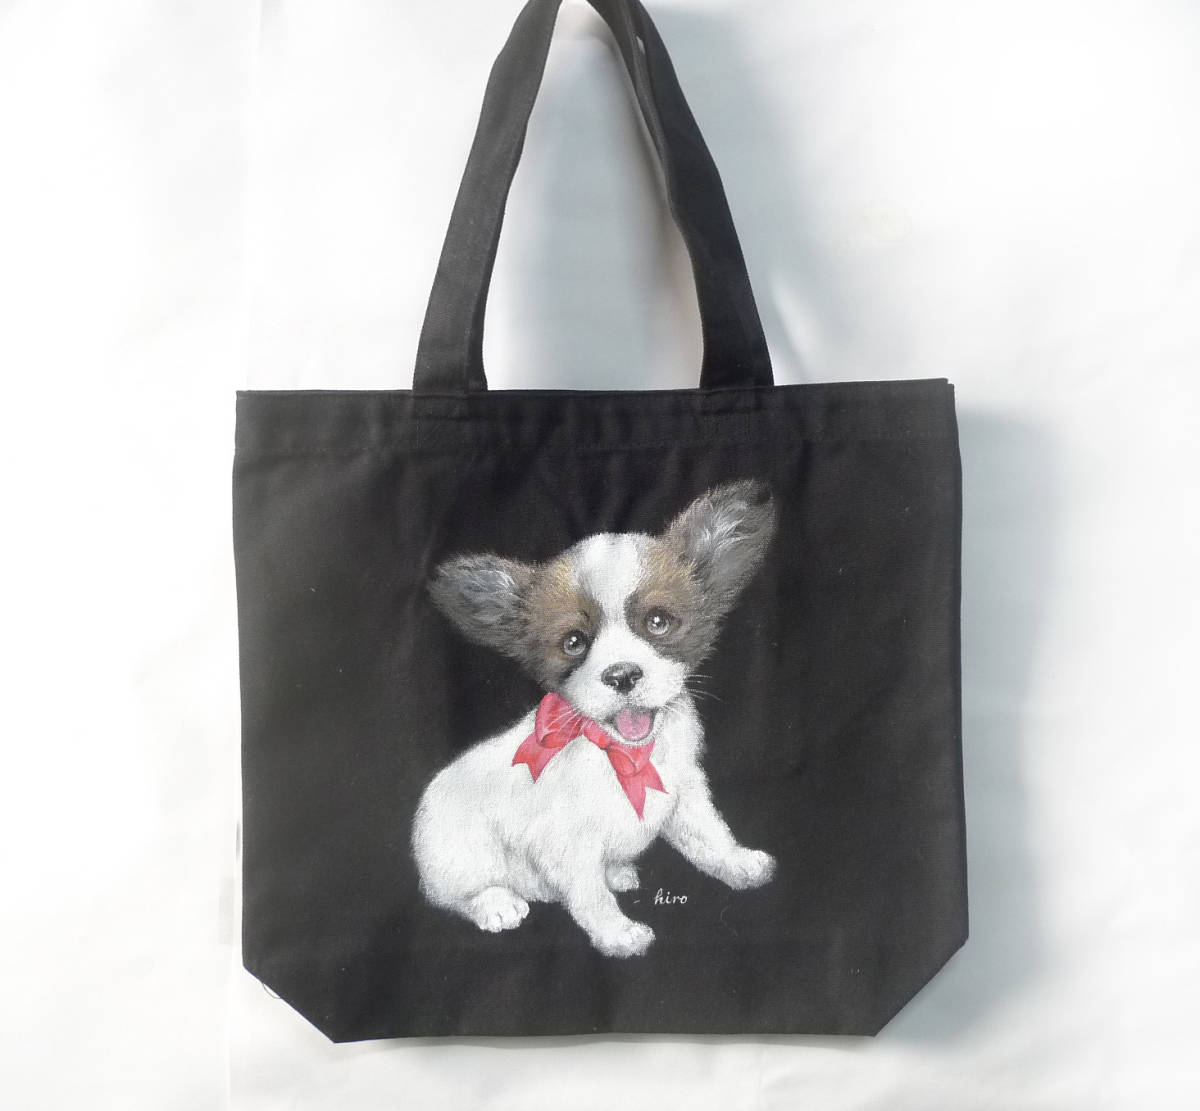  hand-drawn illustrations one Chan * canvas tote bag 2 pocket attaching papi on black 